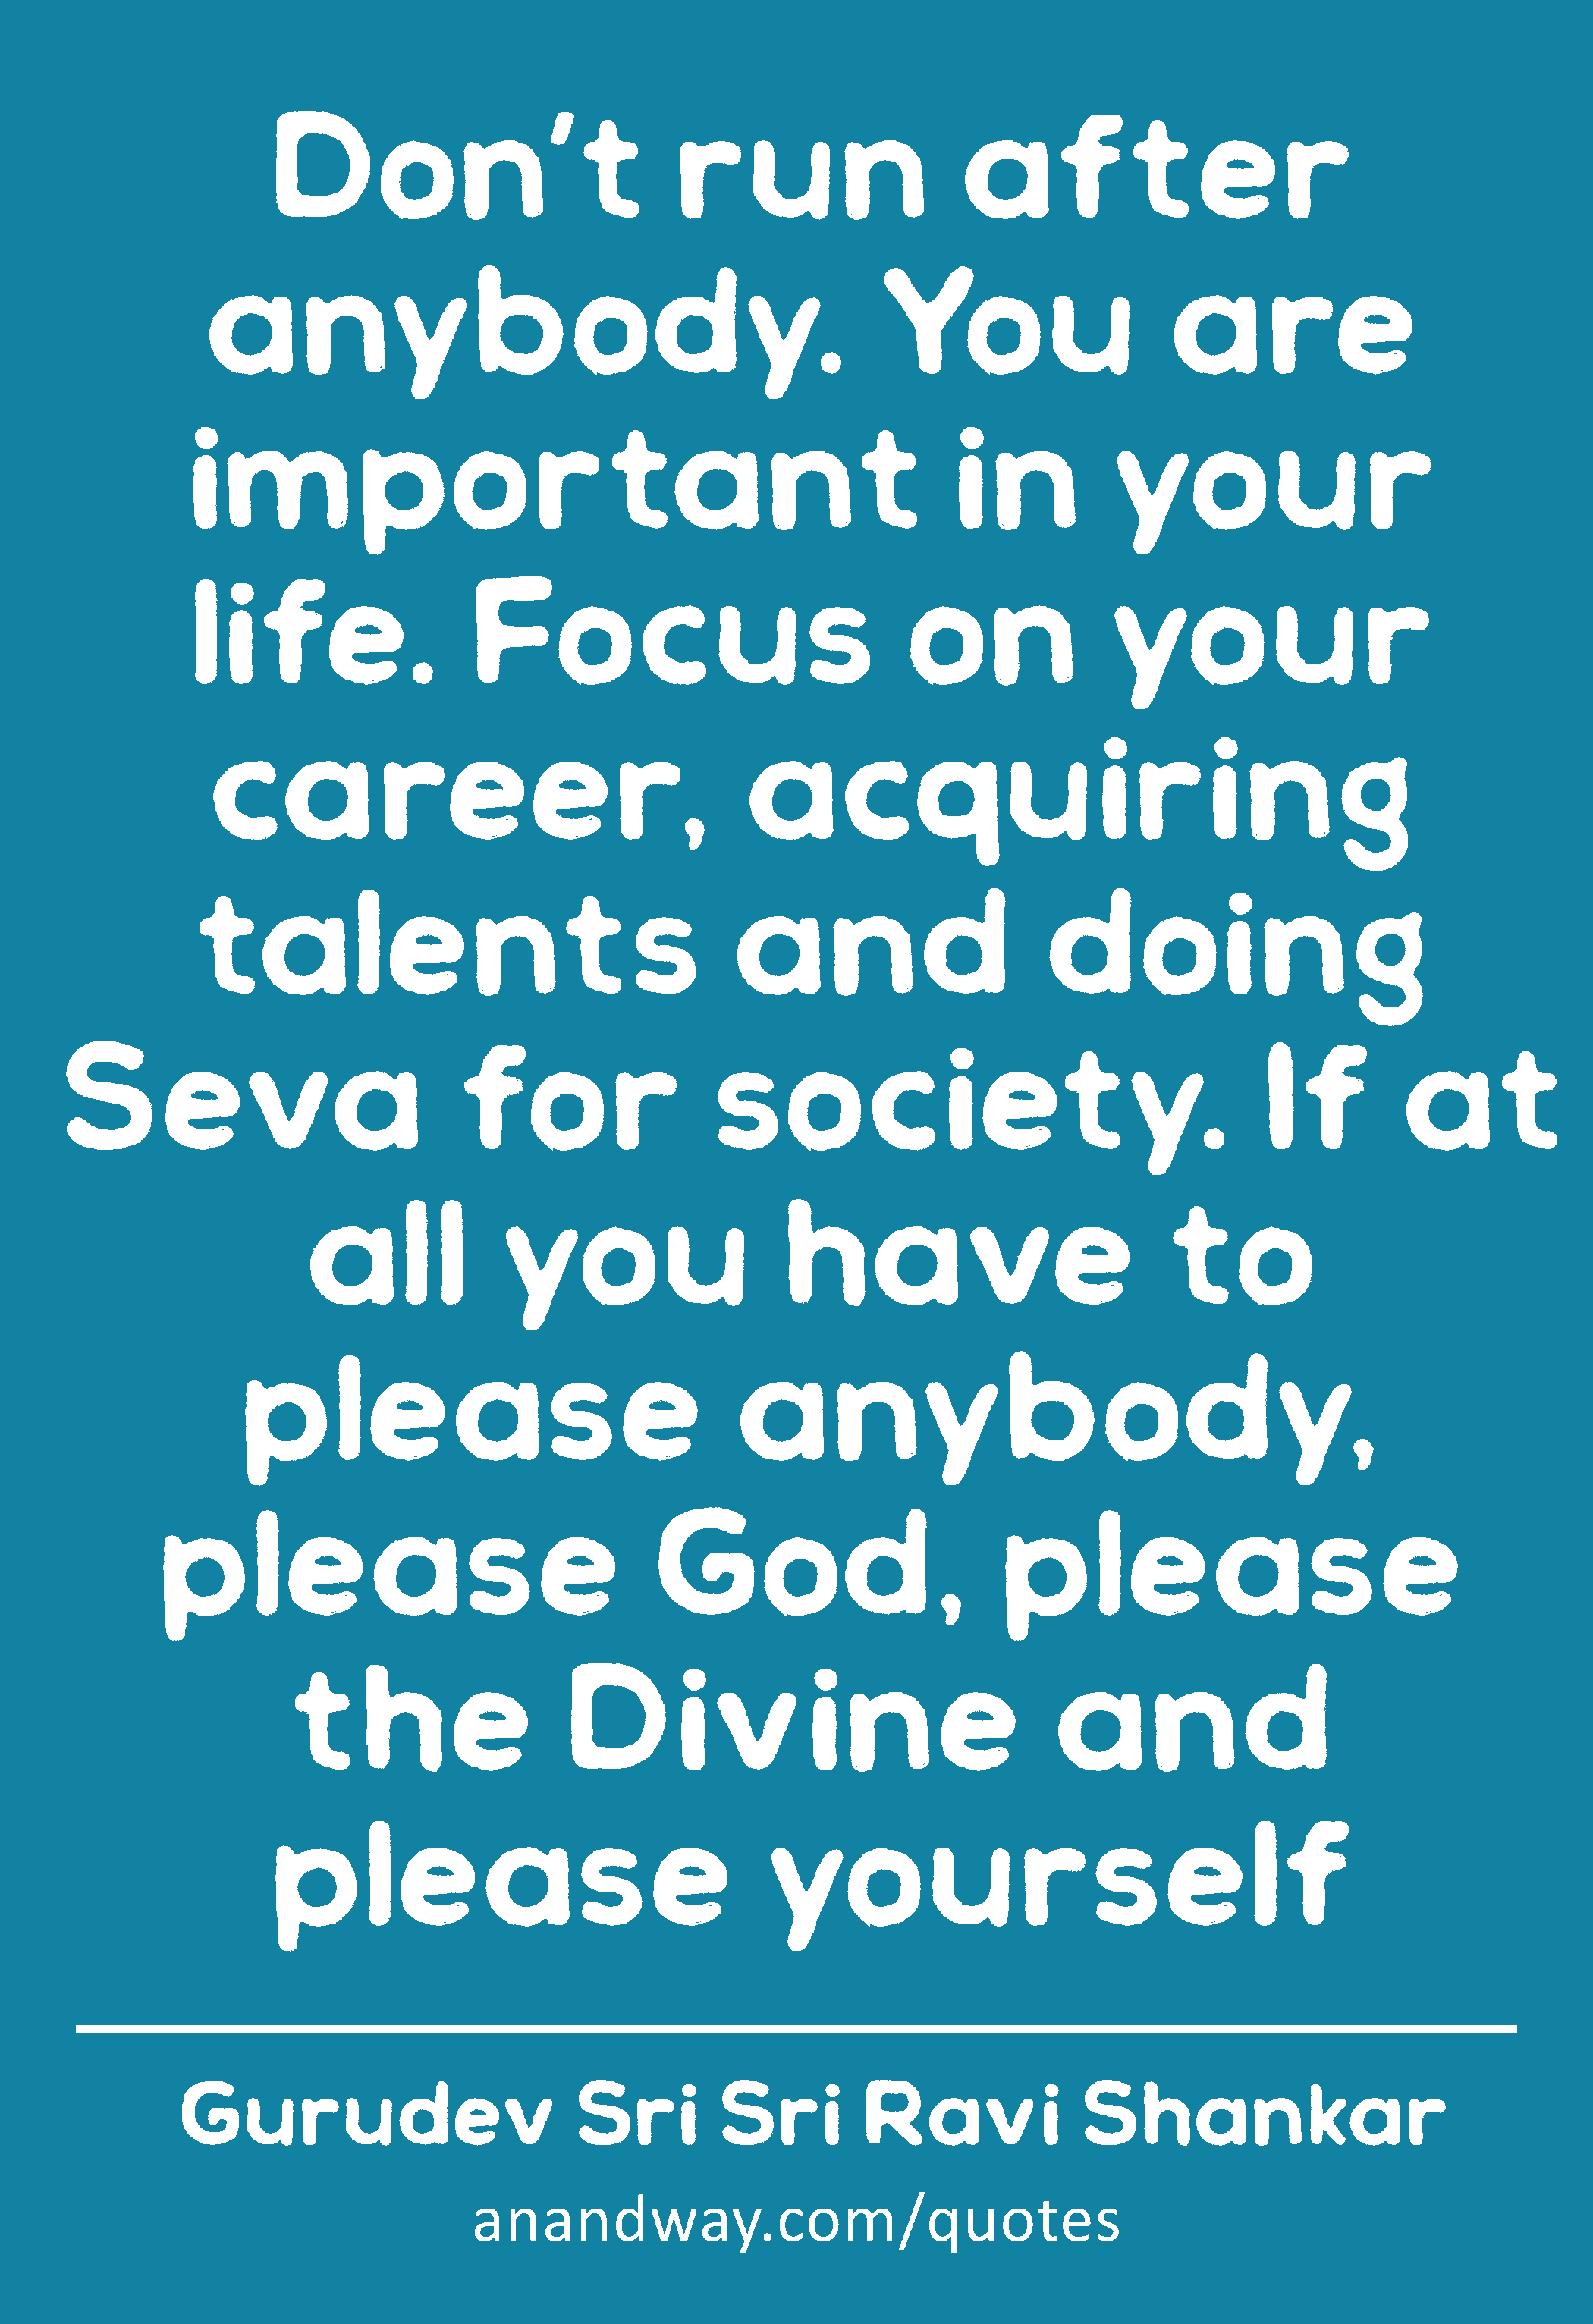 Don’t run after anybody. You are important in your life. Focus on your career, acquiring talents
 -Gurudev Sri Sri Ravi Shankar